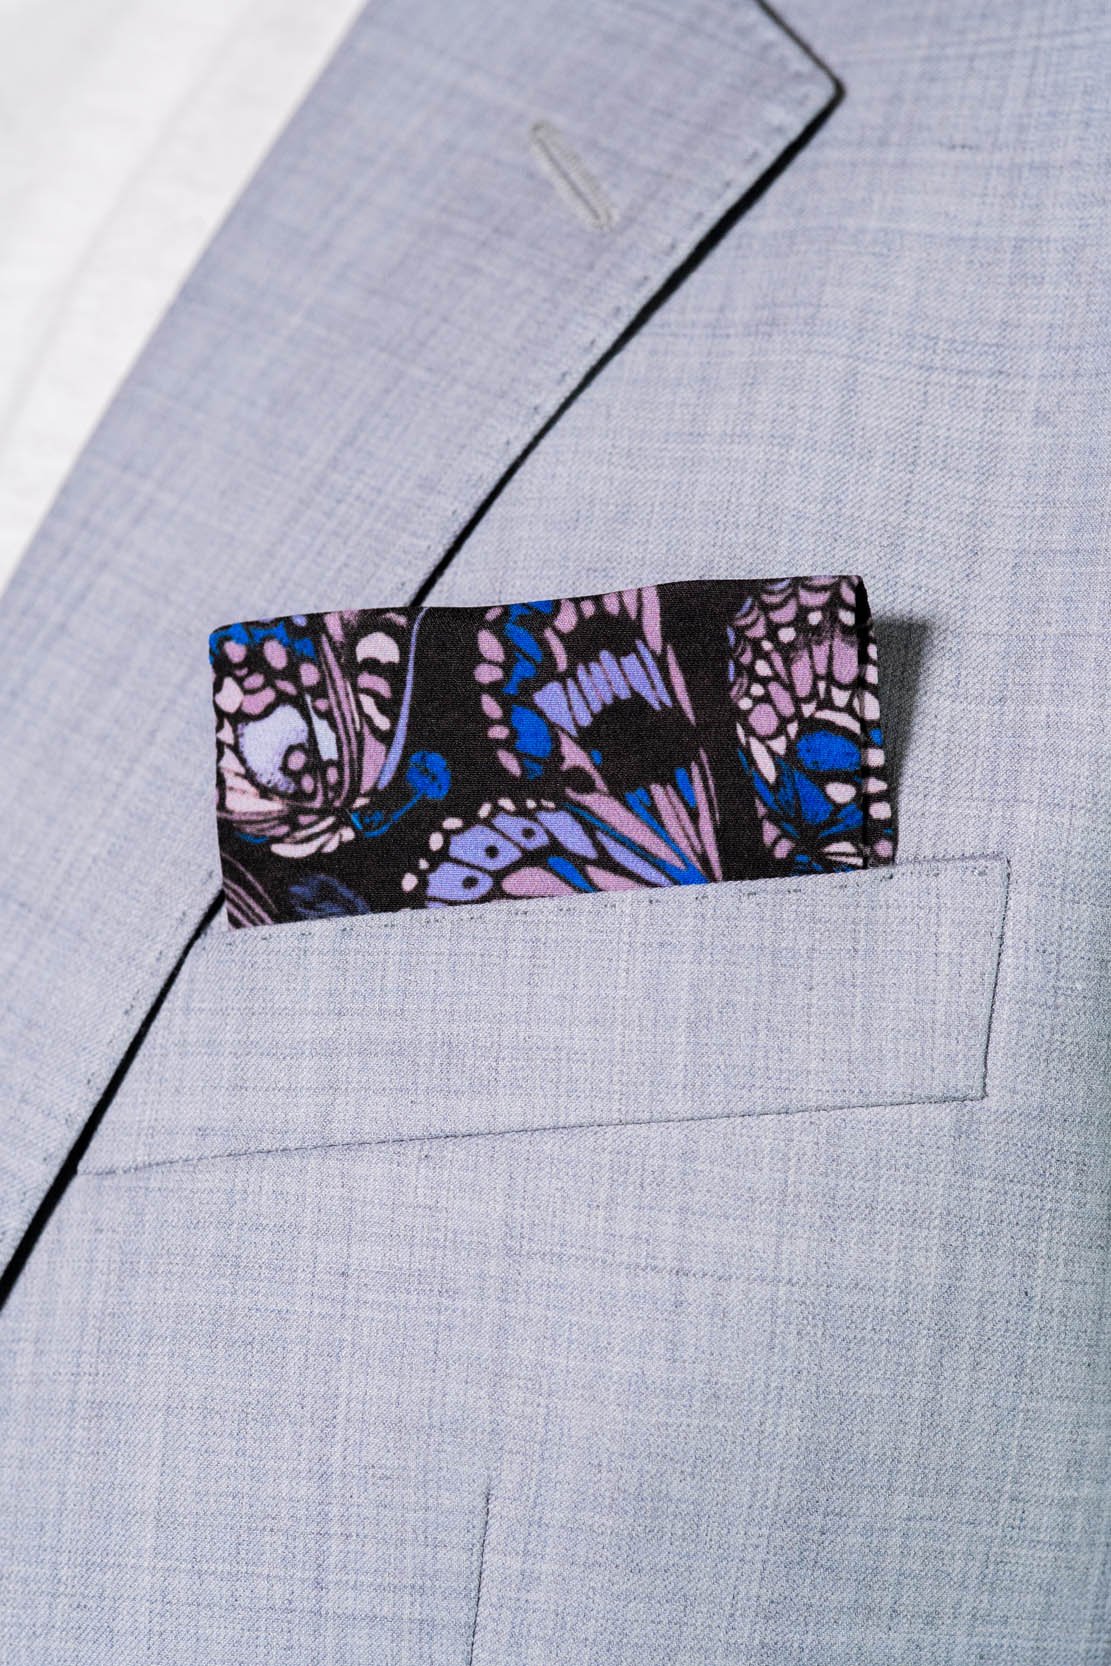 RARE CUT's The Butterfly Effect Pocket Square Worn in a Suit Jacket